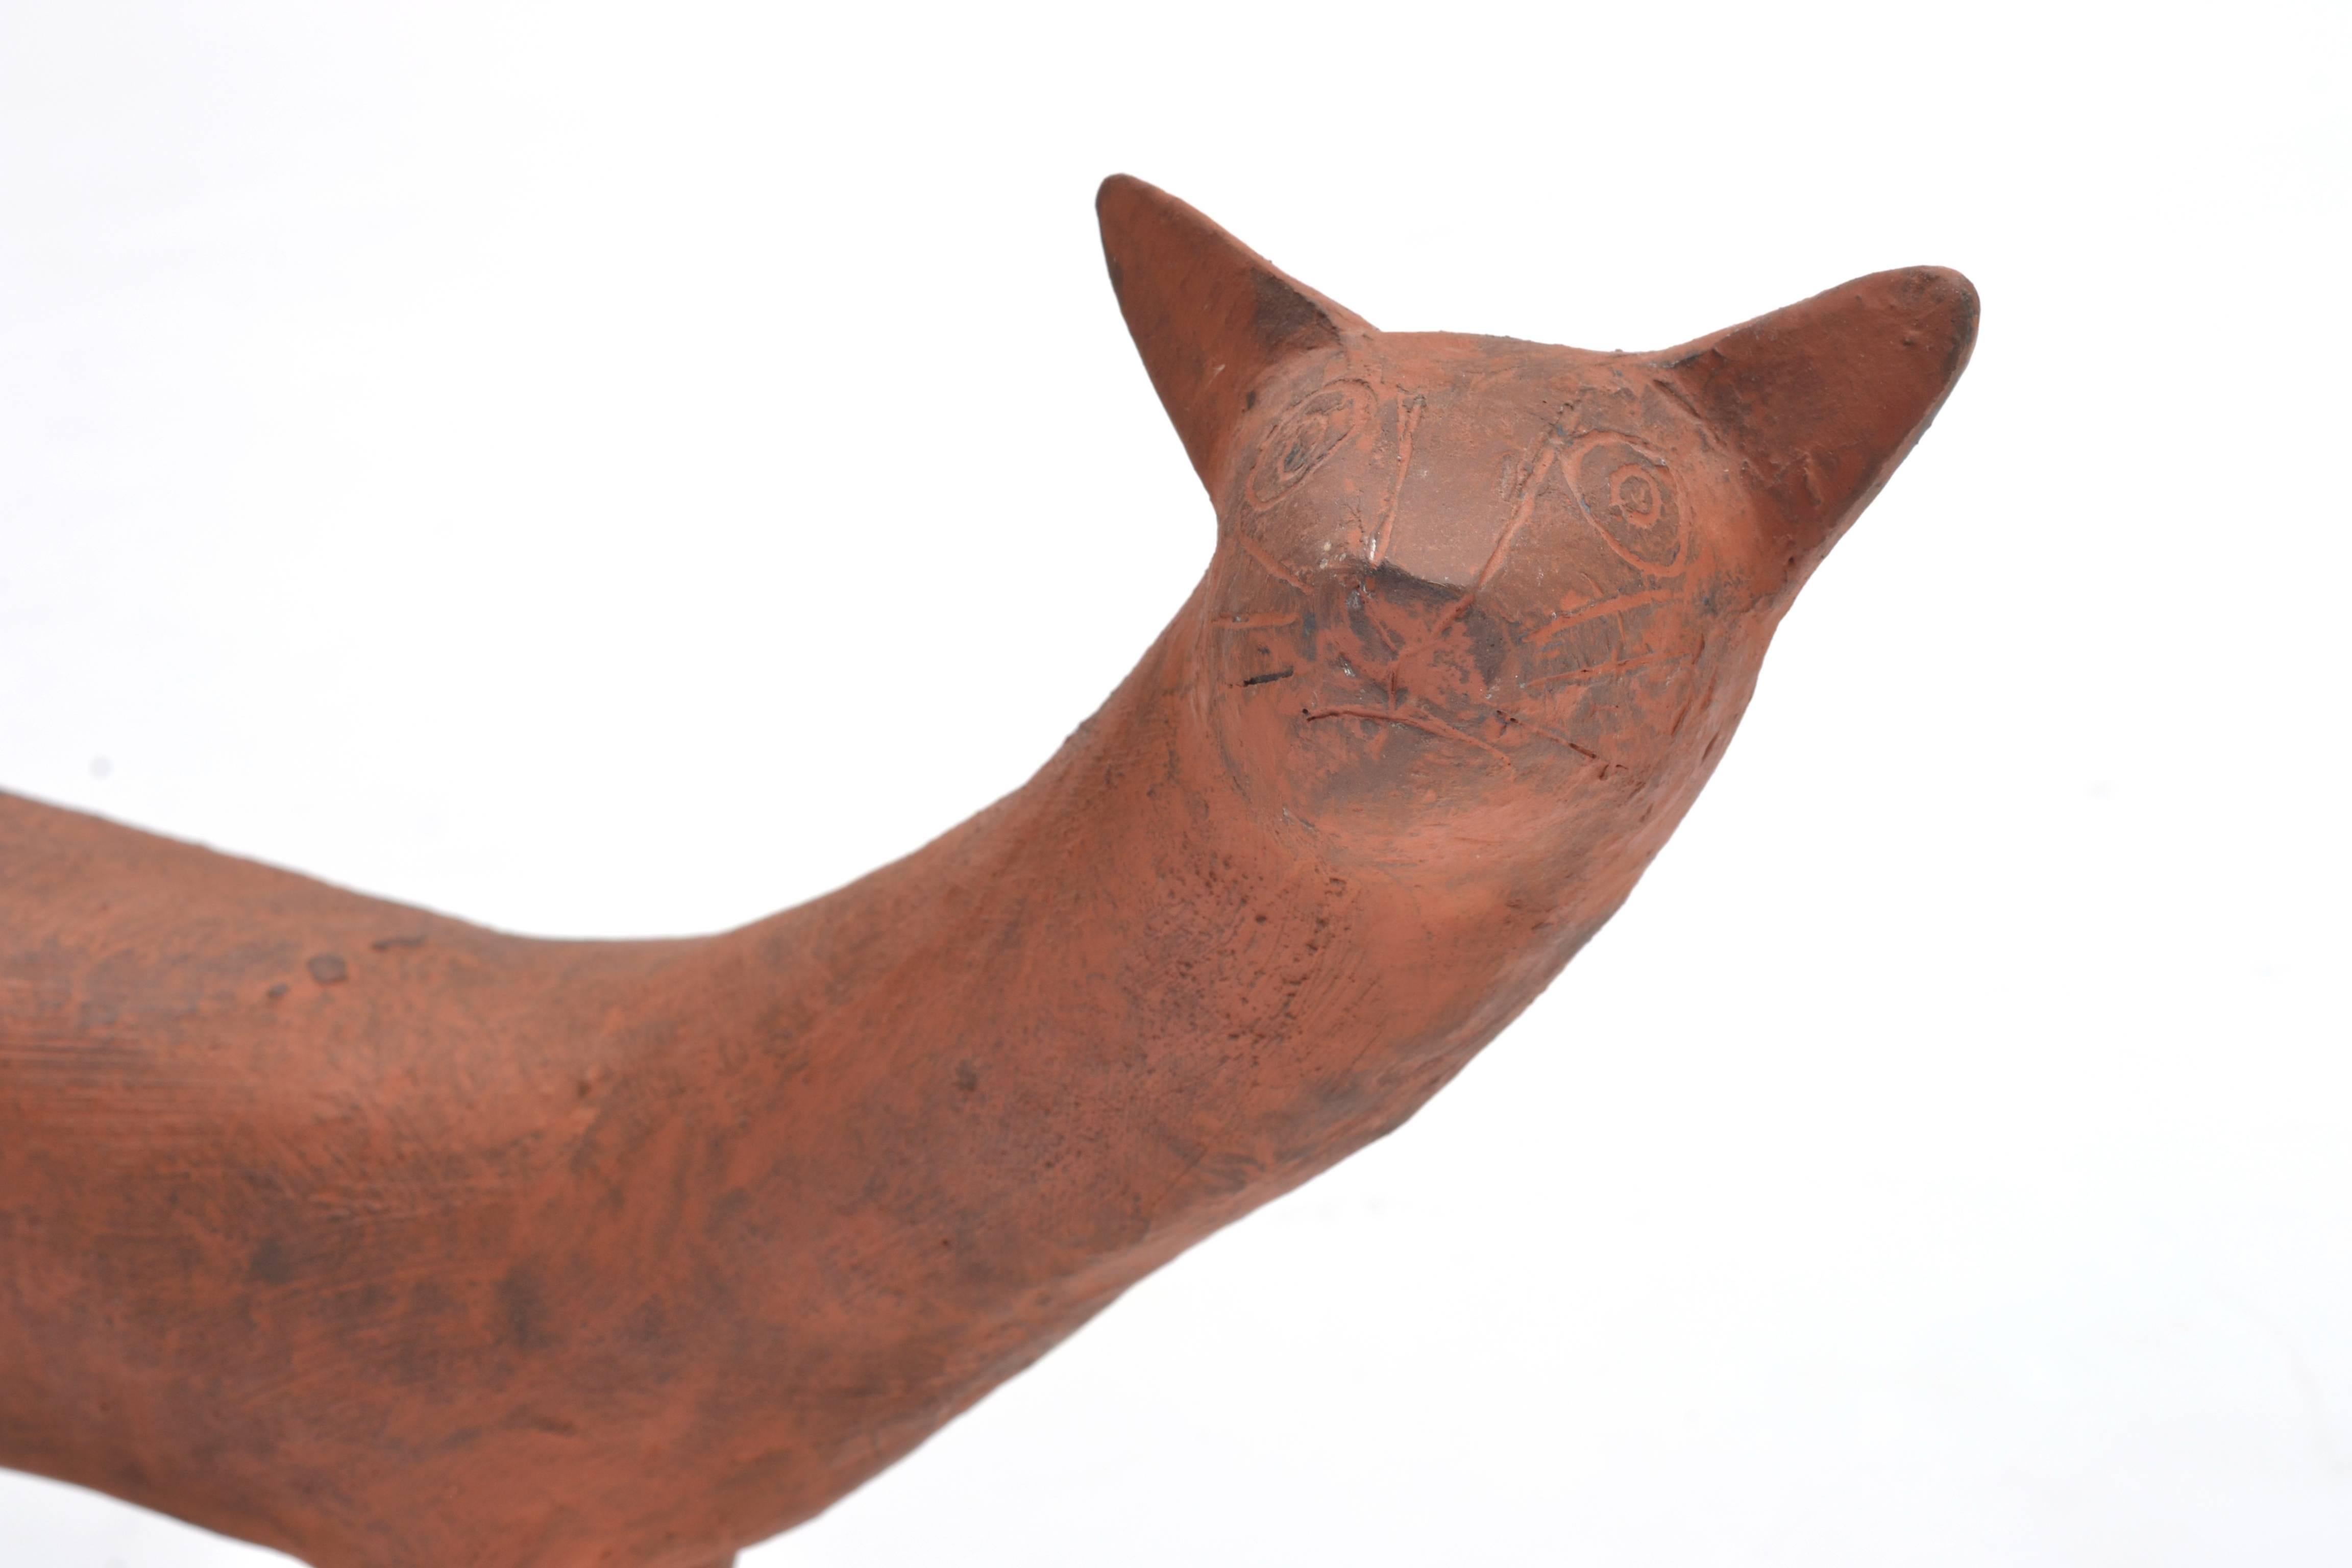 A beautiful cat sculpture by renowned American ceramist and weaver Leza McVey (1907-1984). A Cleveland native, McVey also lived and worked in Houston, Austin, San Antonio and Michigan. McVey's friends and peers included other notable ceramicists